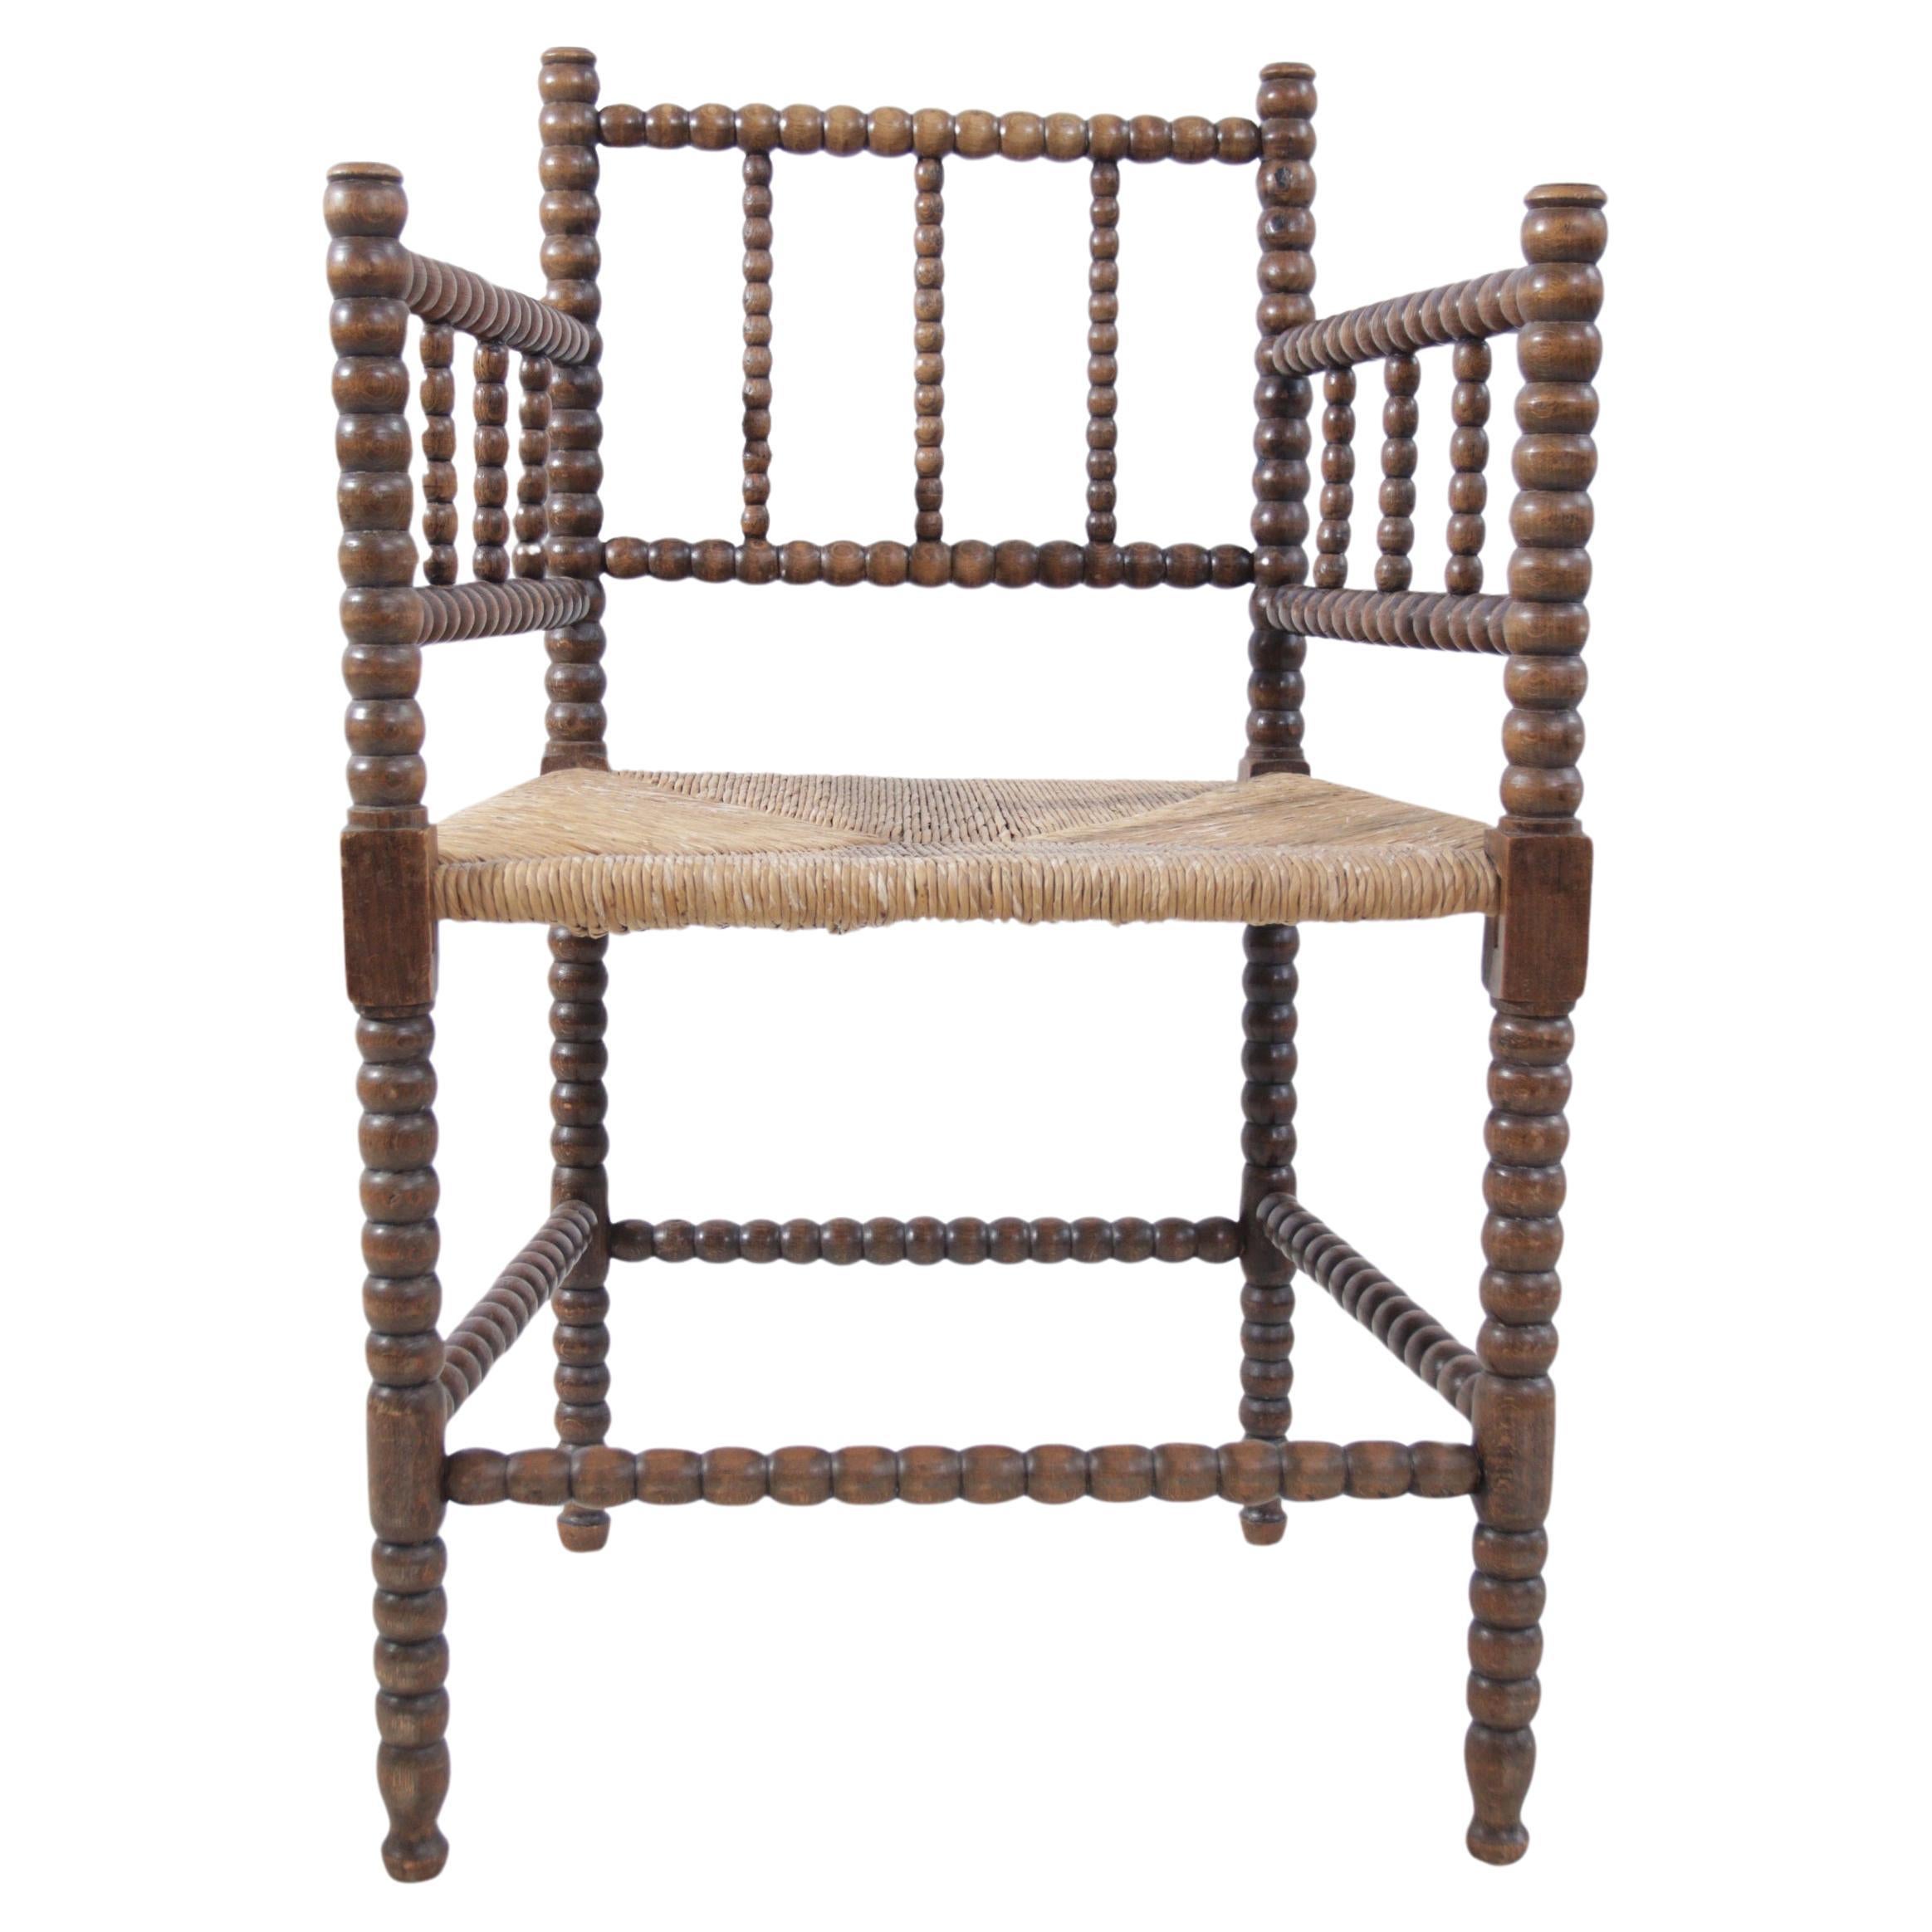 This oak bead-spindle chair, a fine representation of Dutch craftsmanship, merges the simplicity of rural life with the versatility of design. Originating from the Netherlands, it stands as a testimony to the enduring quality of locally sourced oak